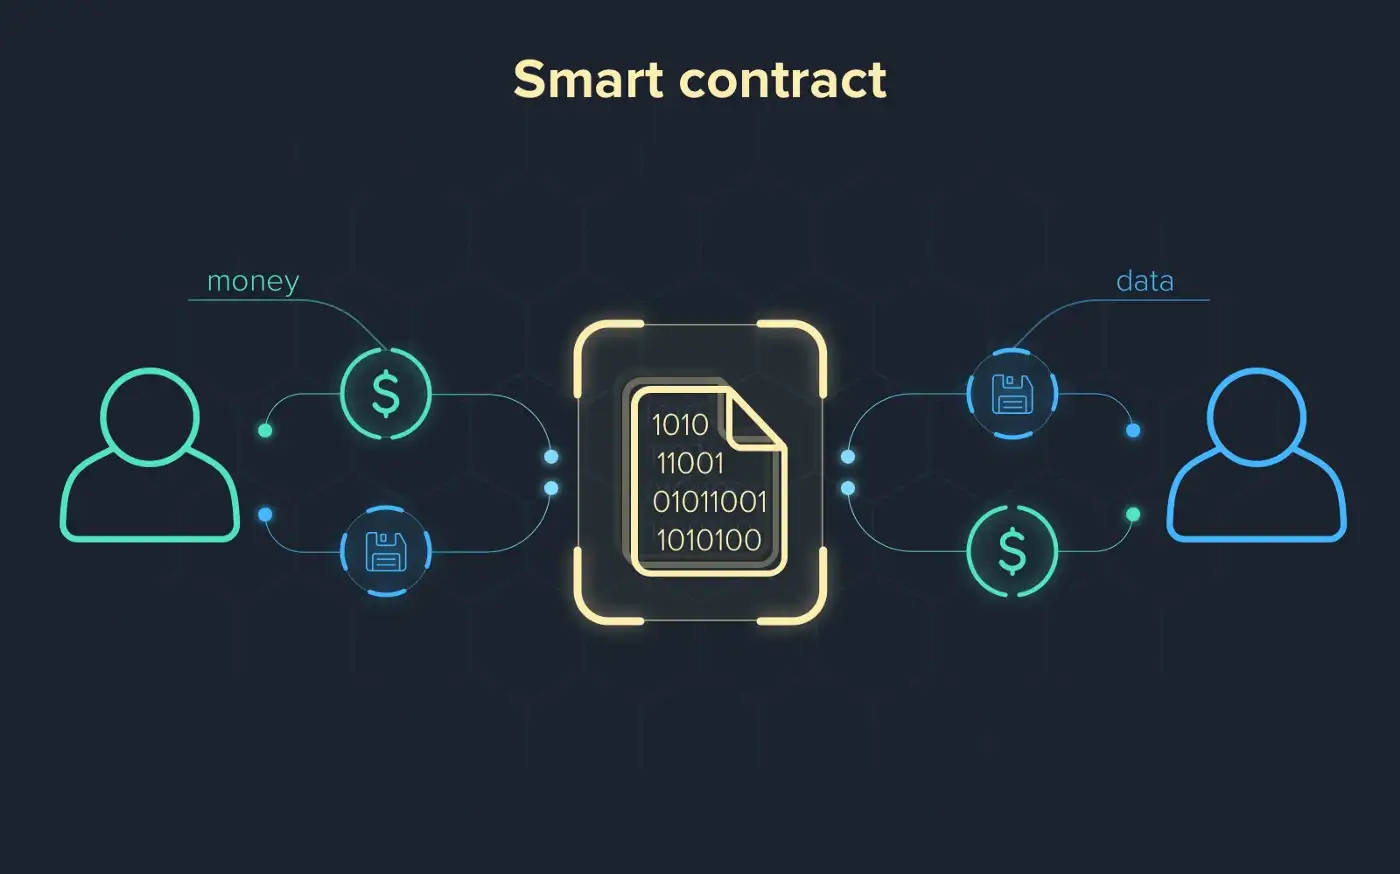 Why are Smart Contracts engulfing most of the pre-existing Financial Services Industries?